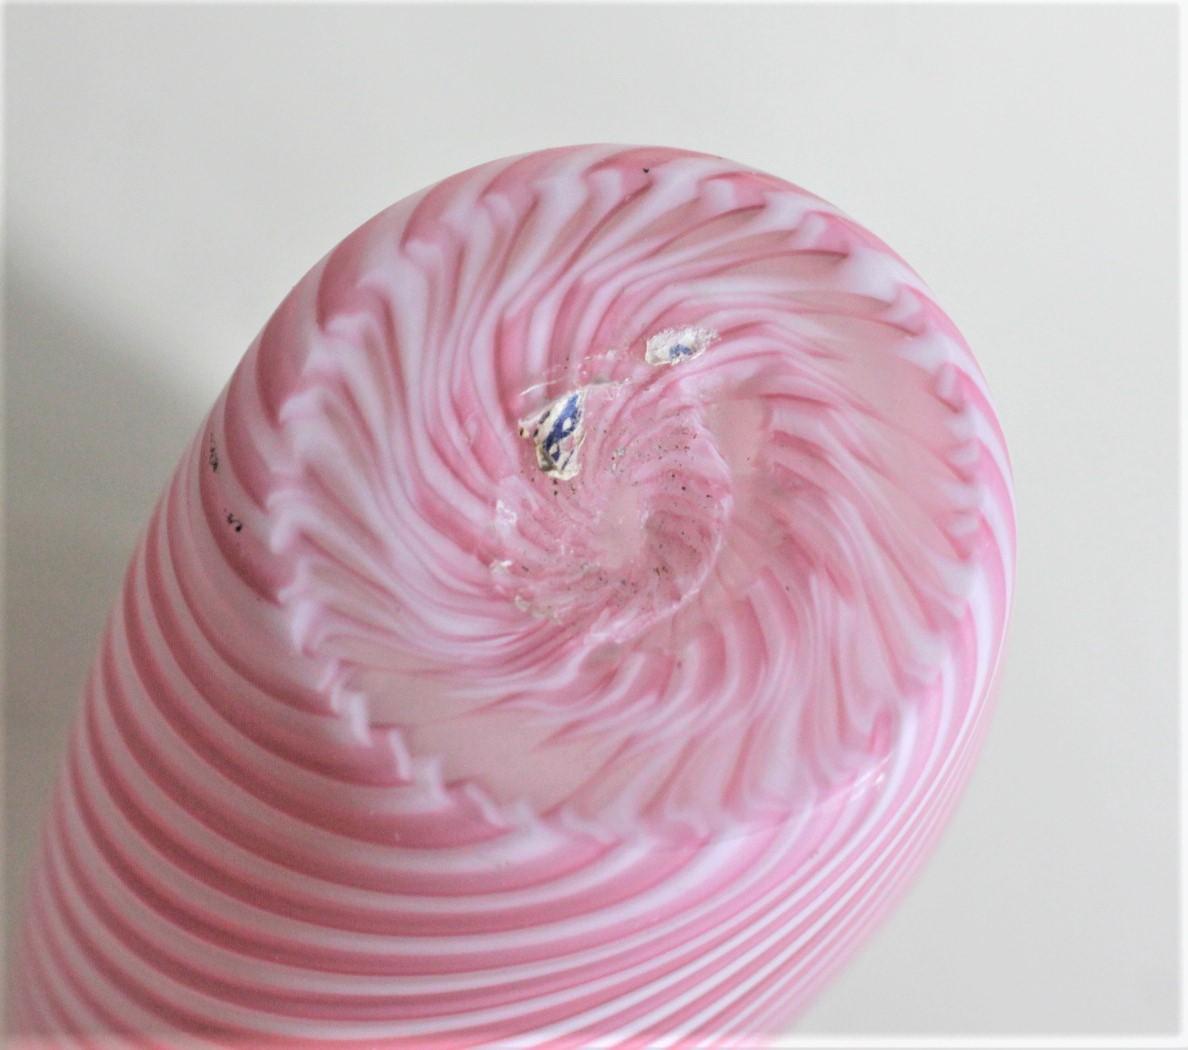 Mid-Century Modern Murano Cranberry or Pink and White Striped Art Glass Vase 3